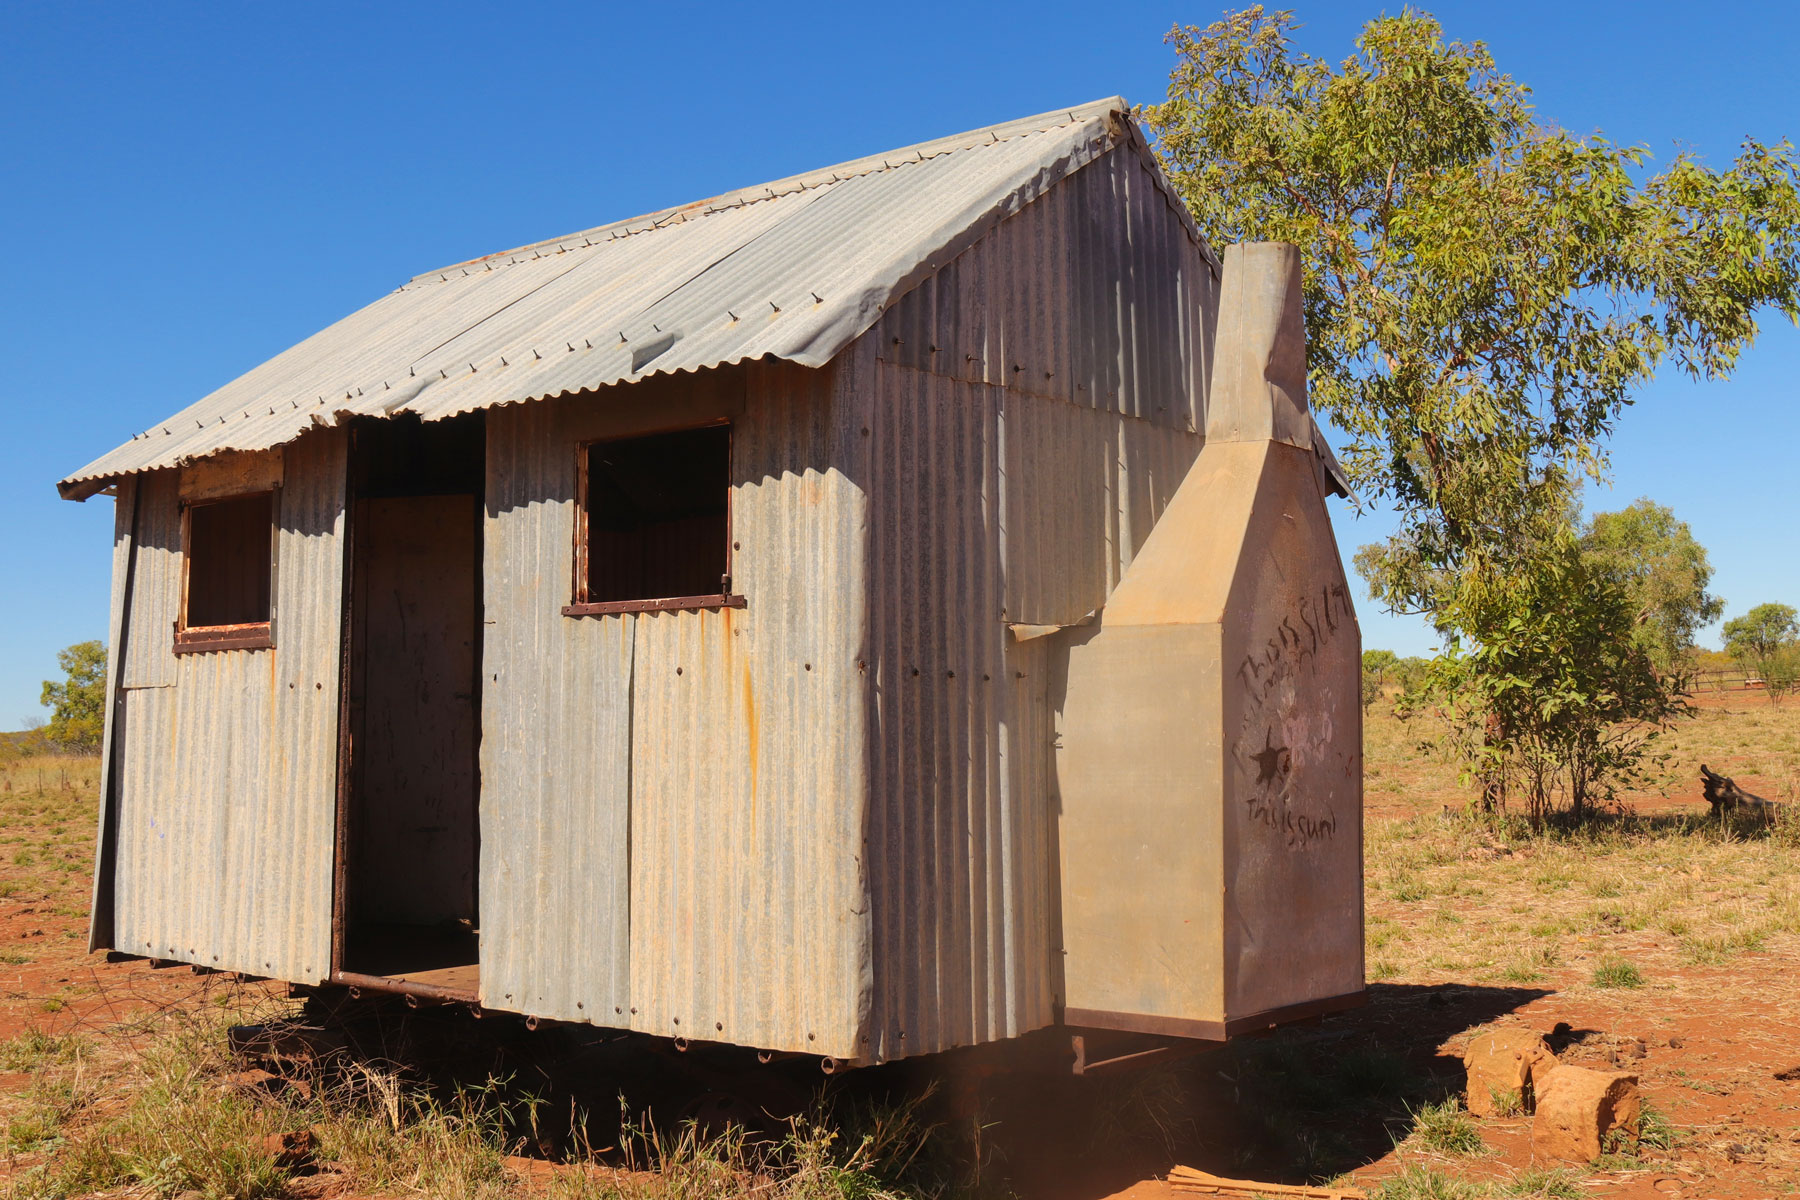 A small outhouse at the Carranya Station ruins